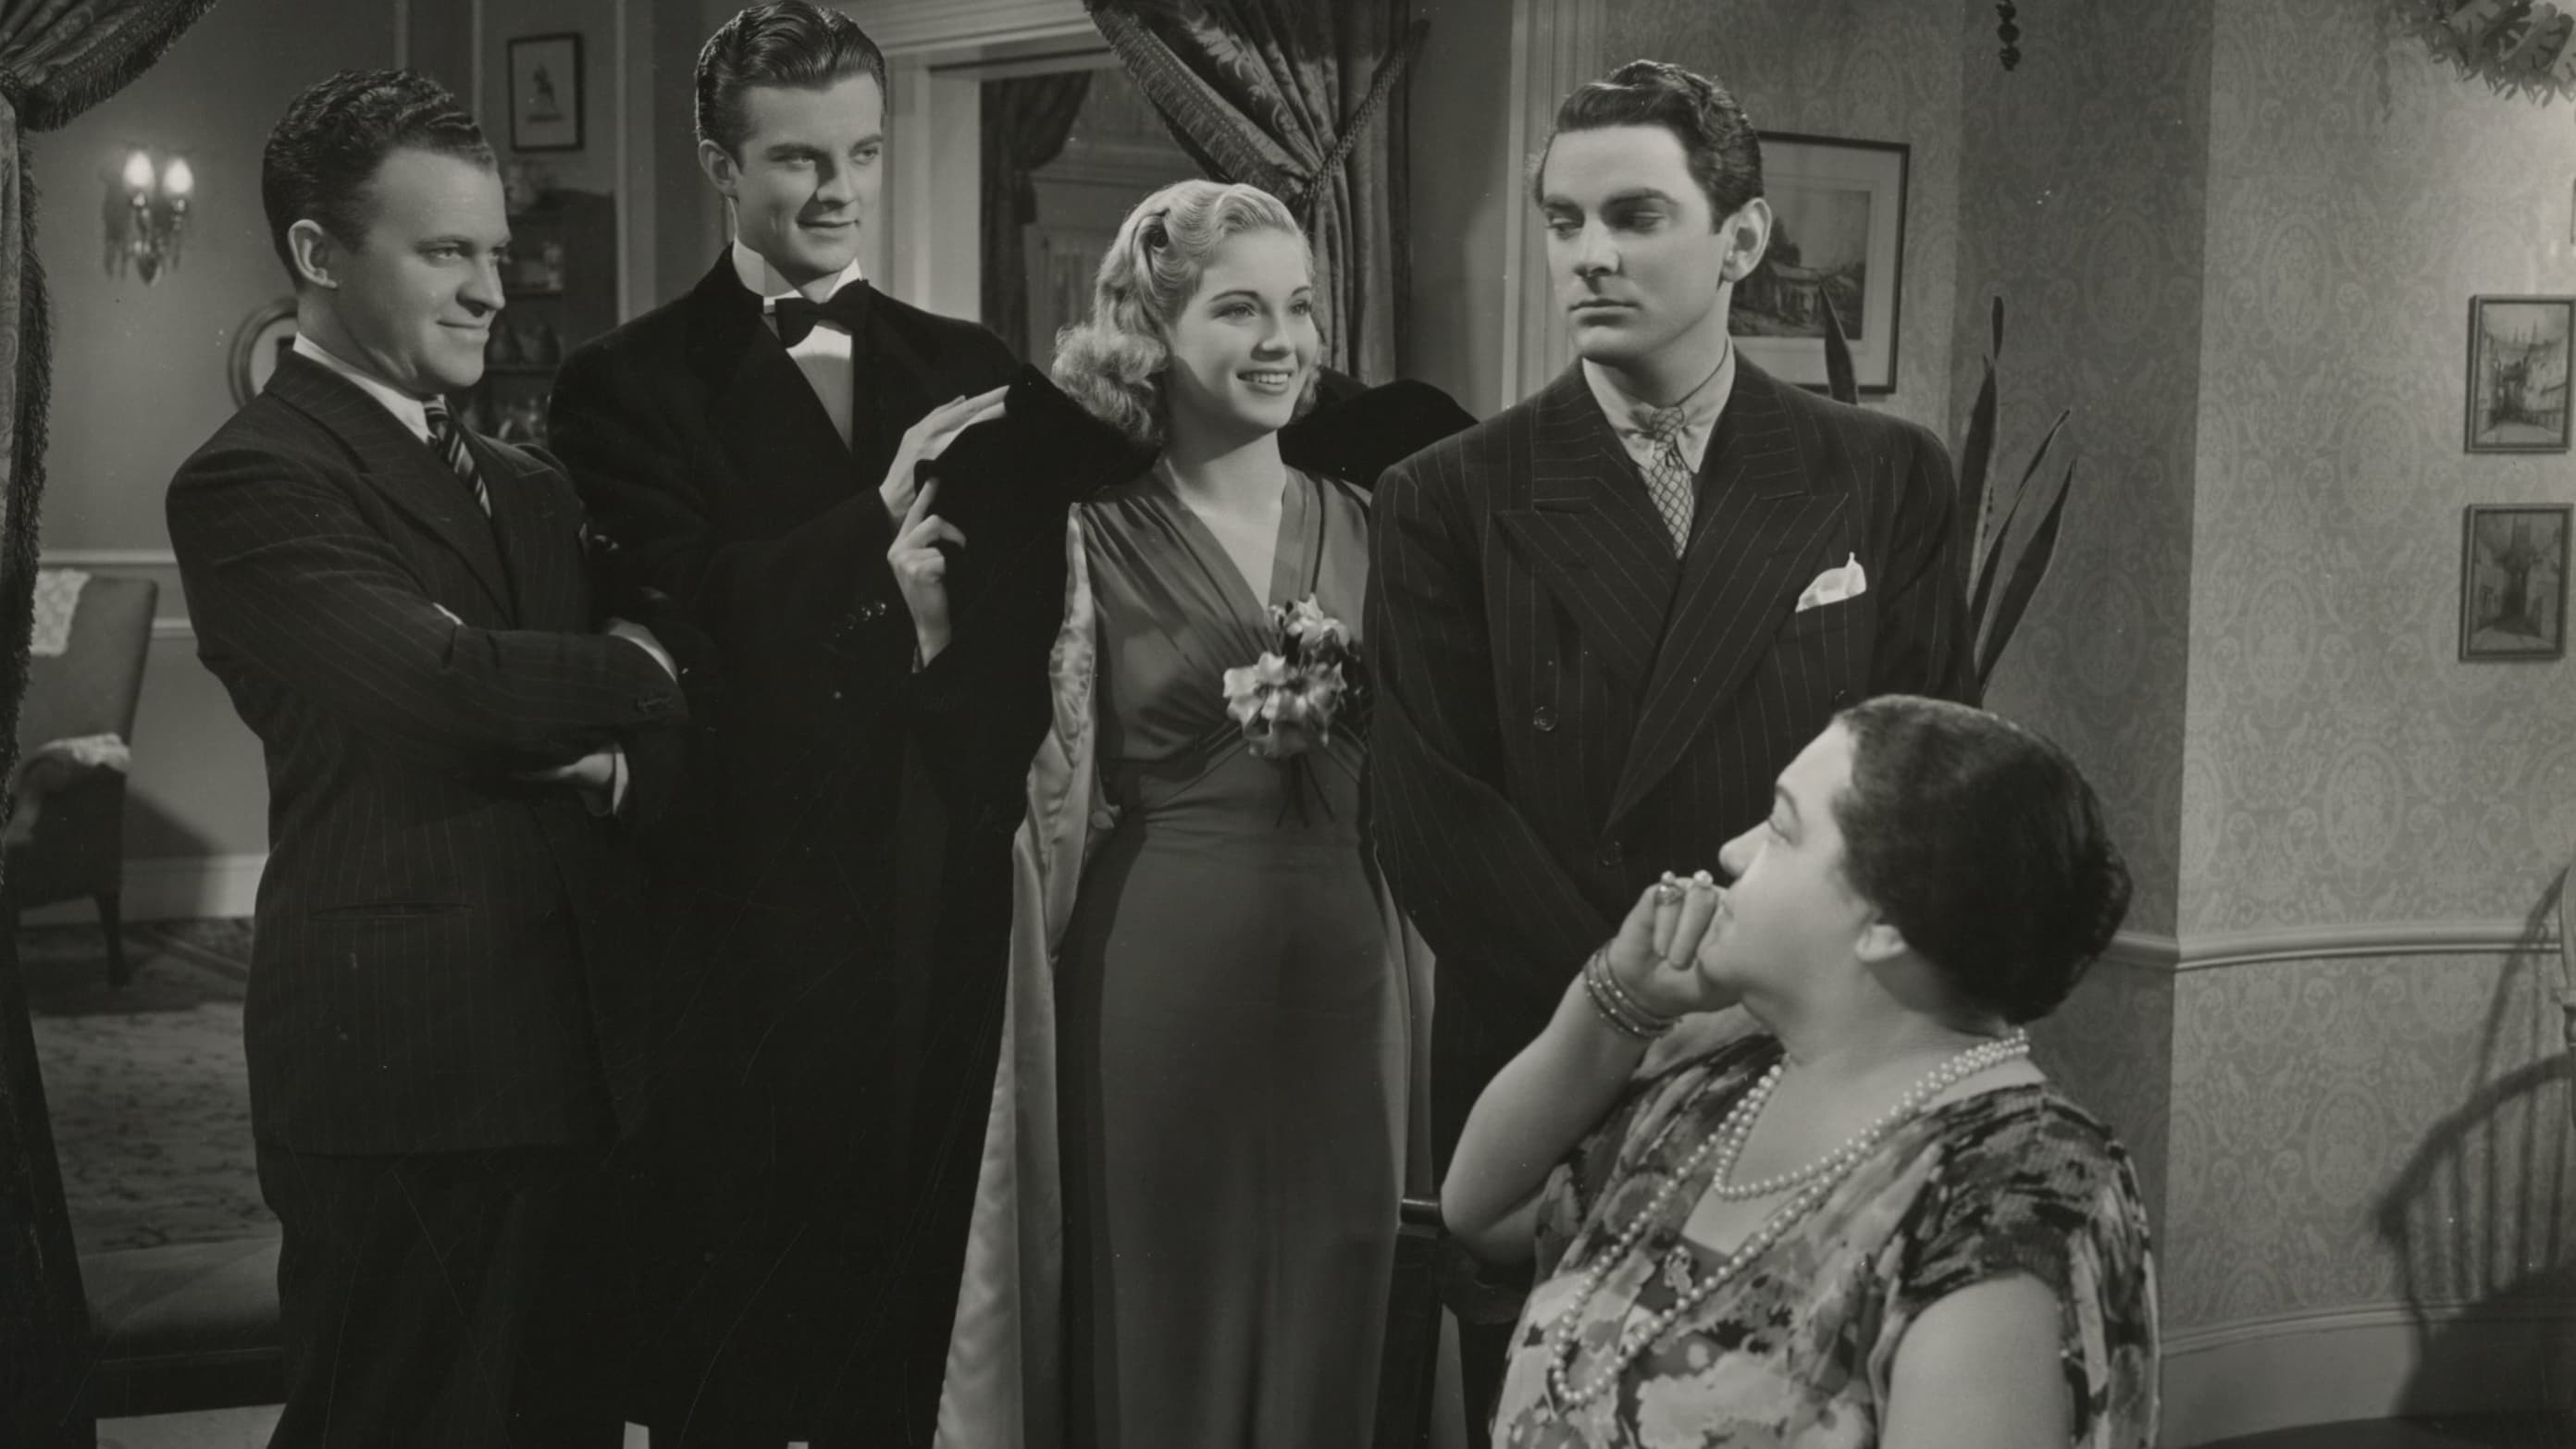 Reckless Living (1938)